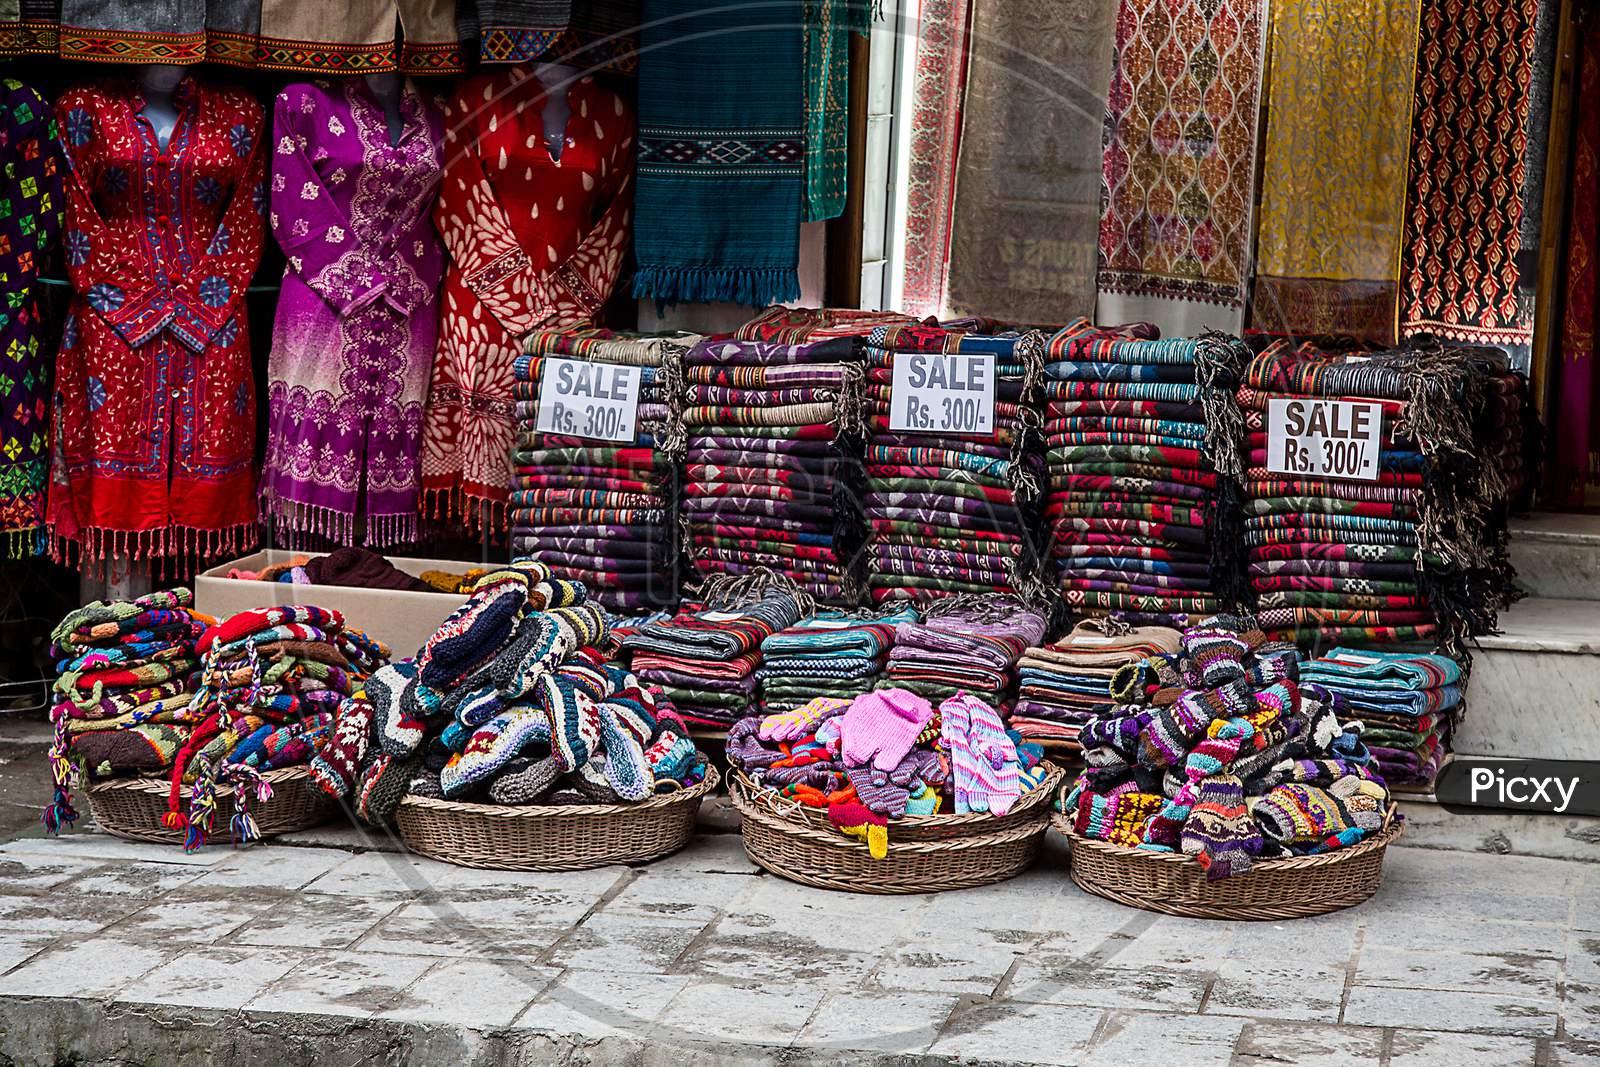 Woolen Handmade Traditional Winter Cloths Outside The Shop For Sale At Mall Road, Manali. Local Street Baazar Market - Image